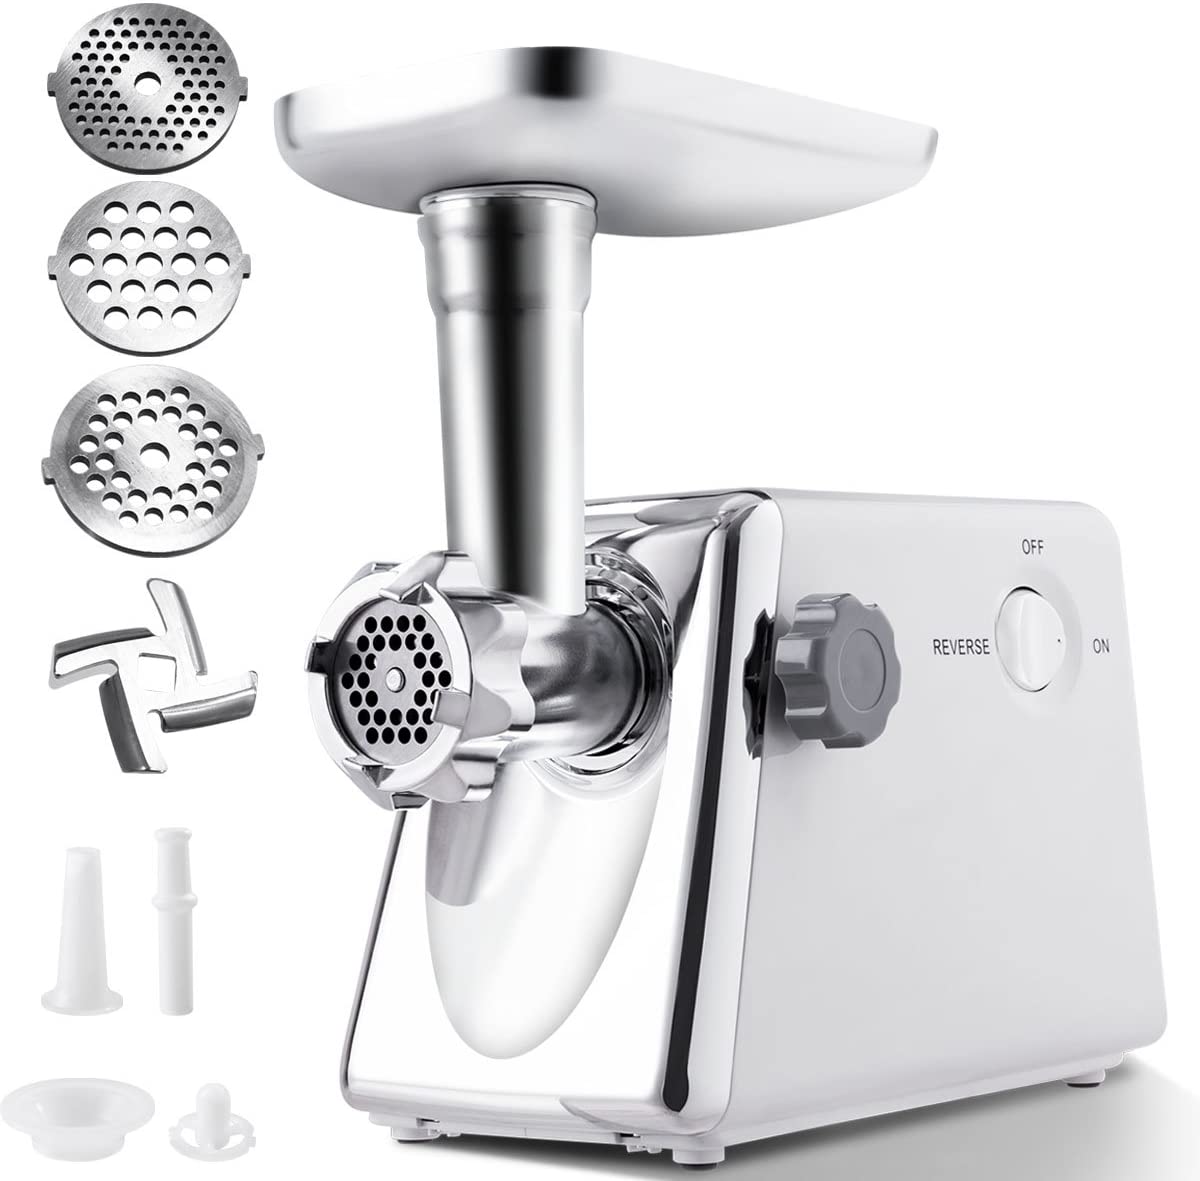 Dreamade Electric Mincer with Sausage Filler, Perforated Slicer, Sausage Machine 1300 W, Chopper for Kitchens